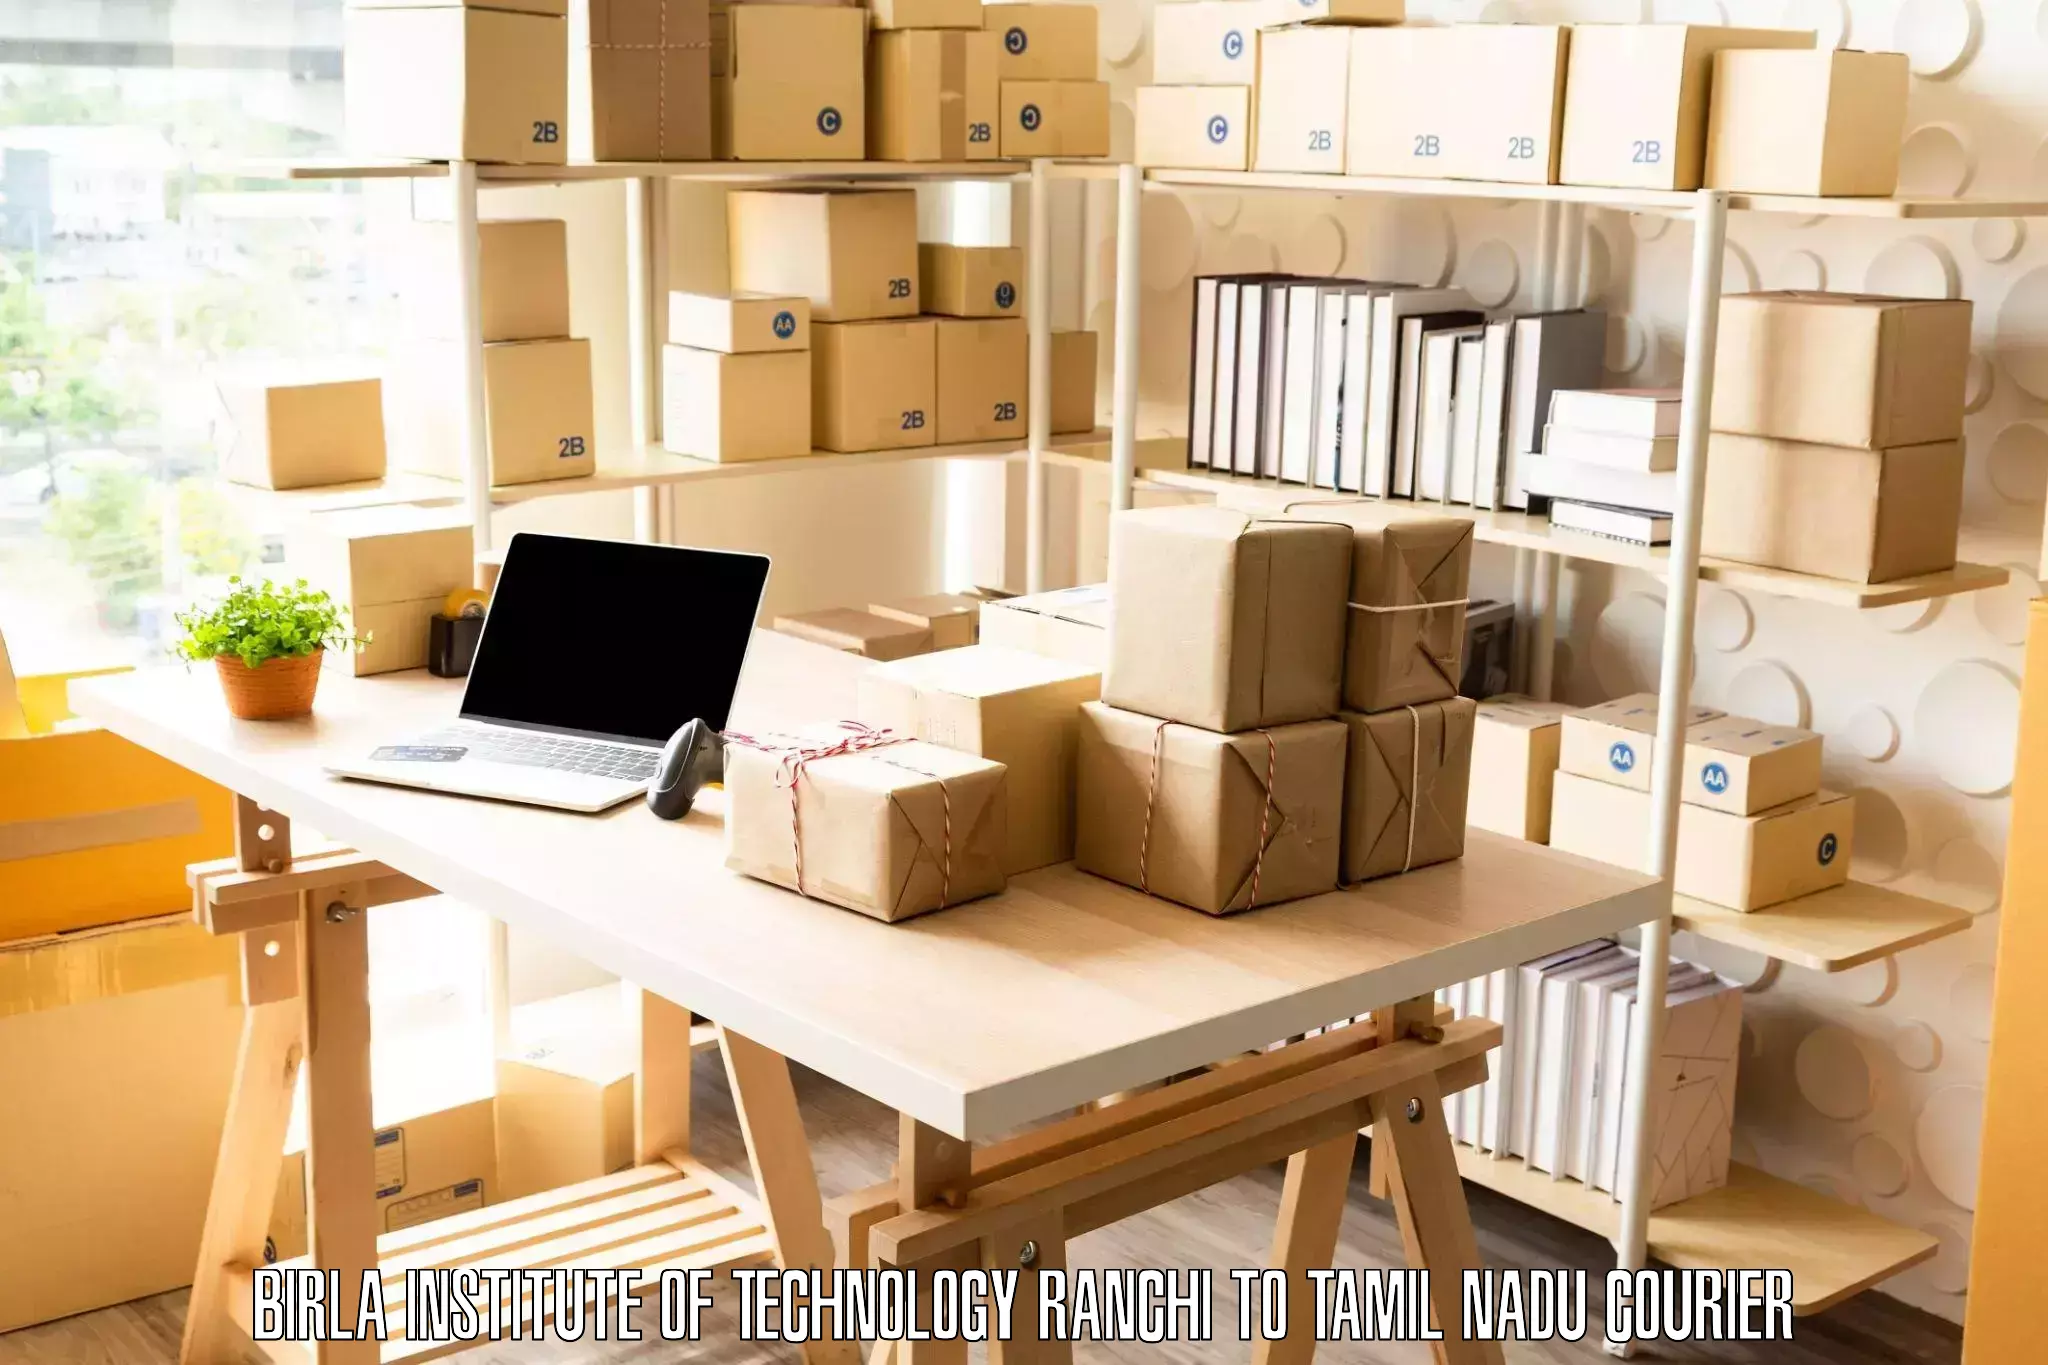 Home goods moving company Birla Institute of Technology Ranchi to Kunnathur